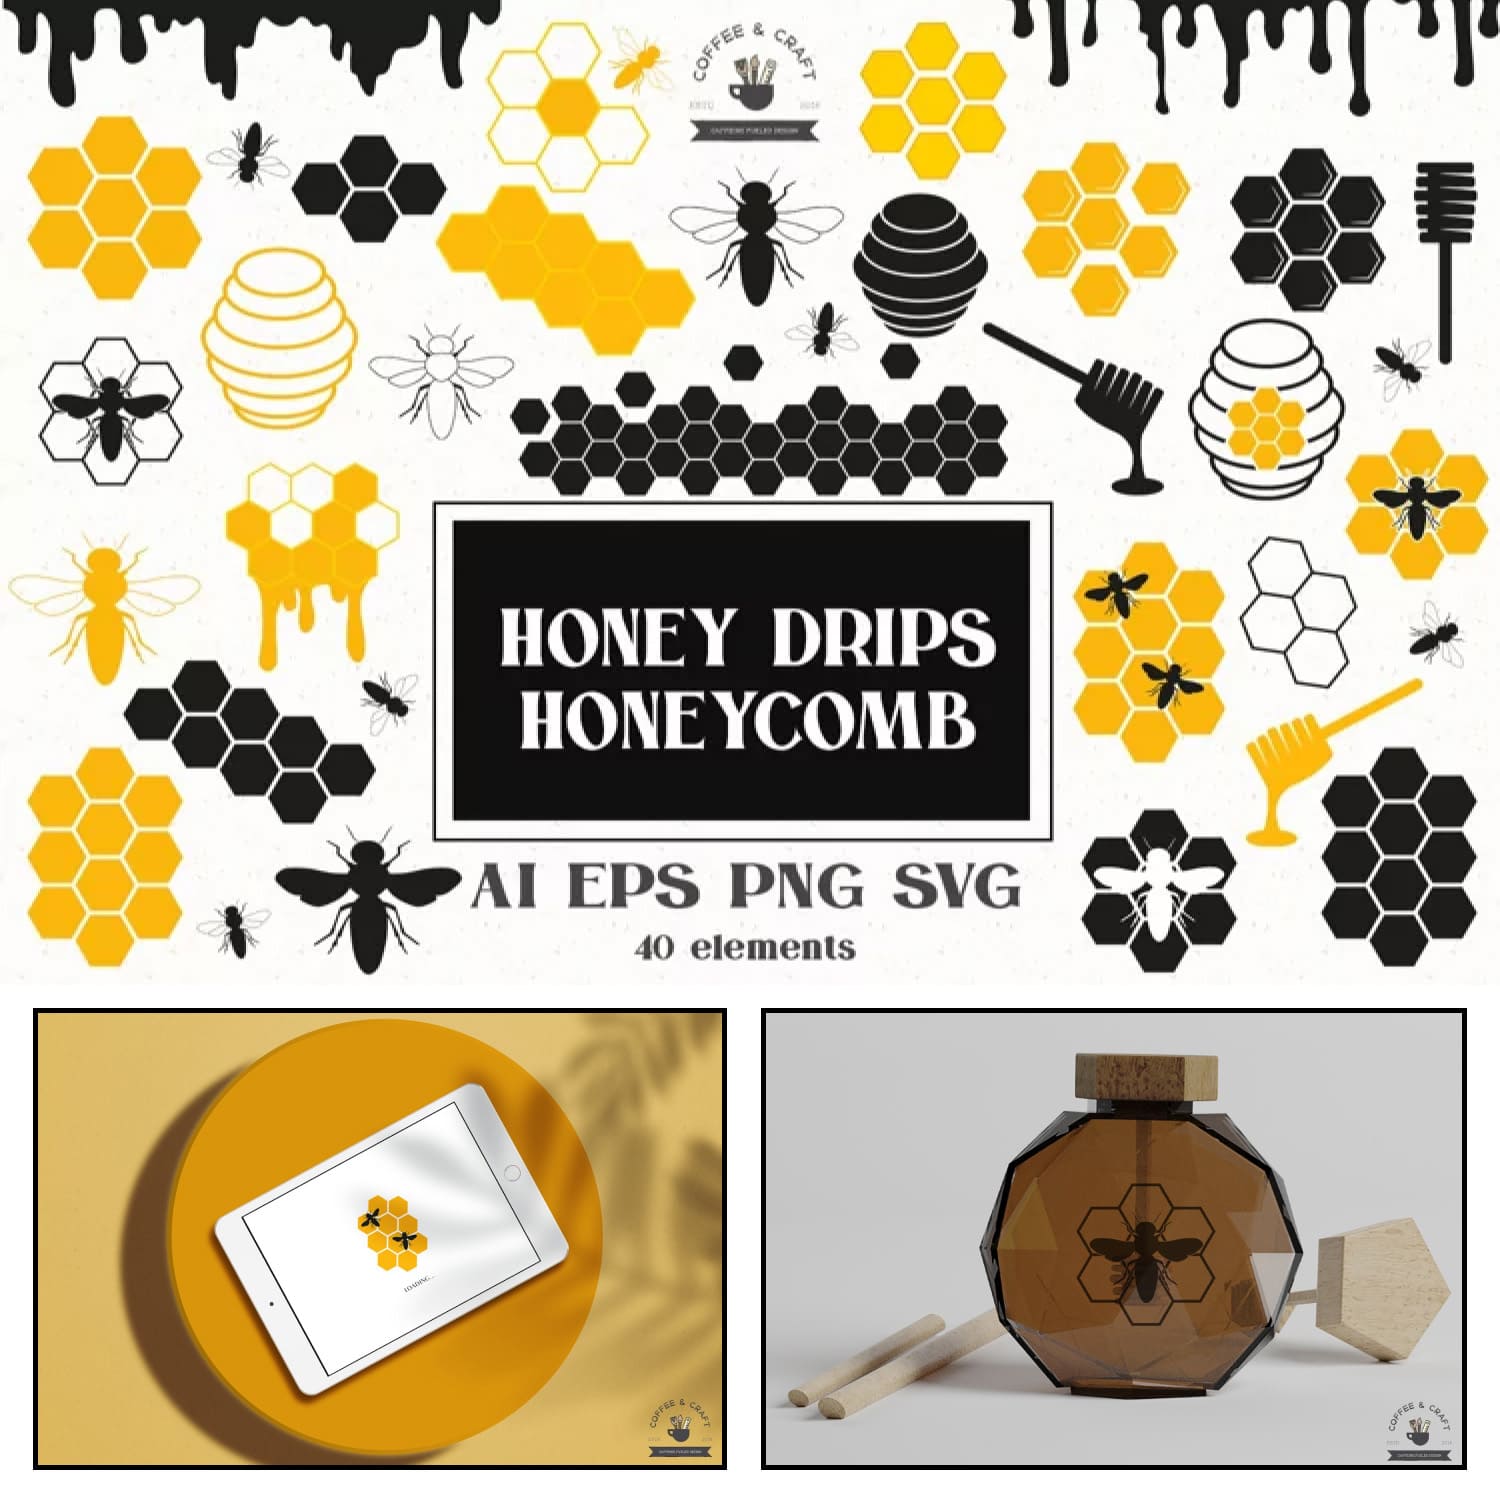 Honey drips honeycombs and bees clip art.